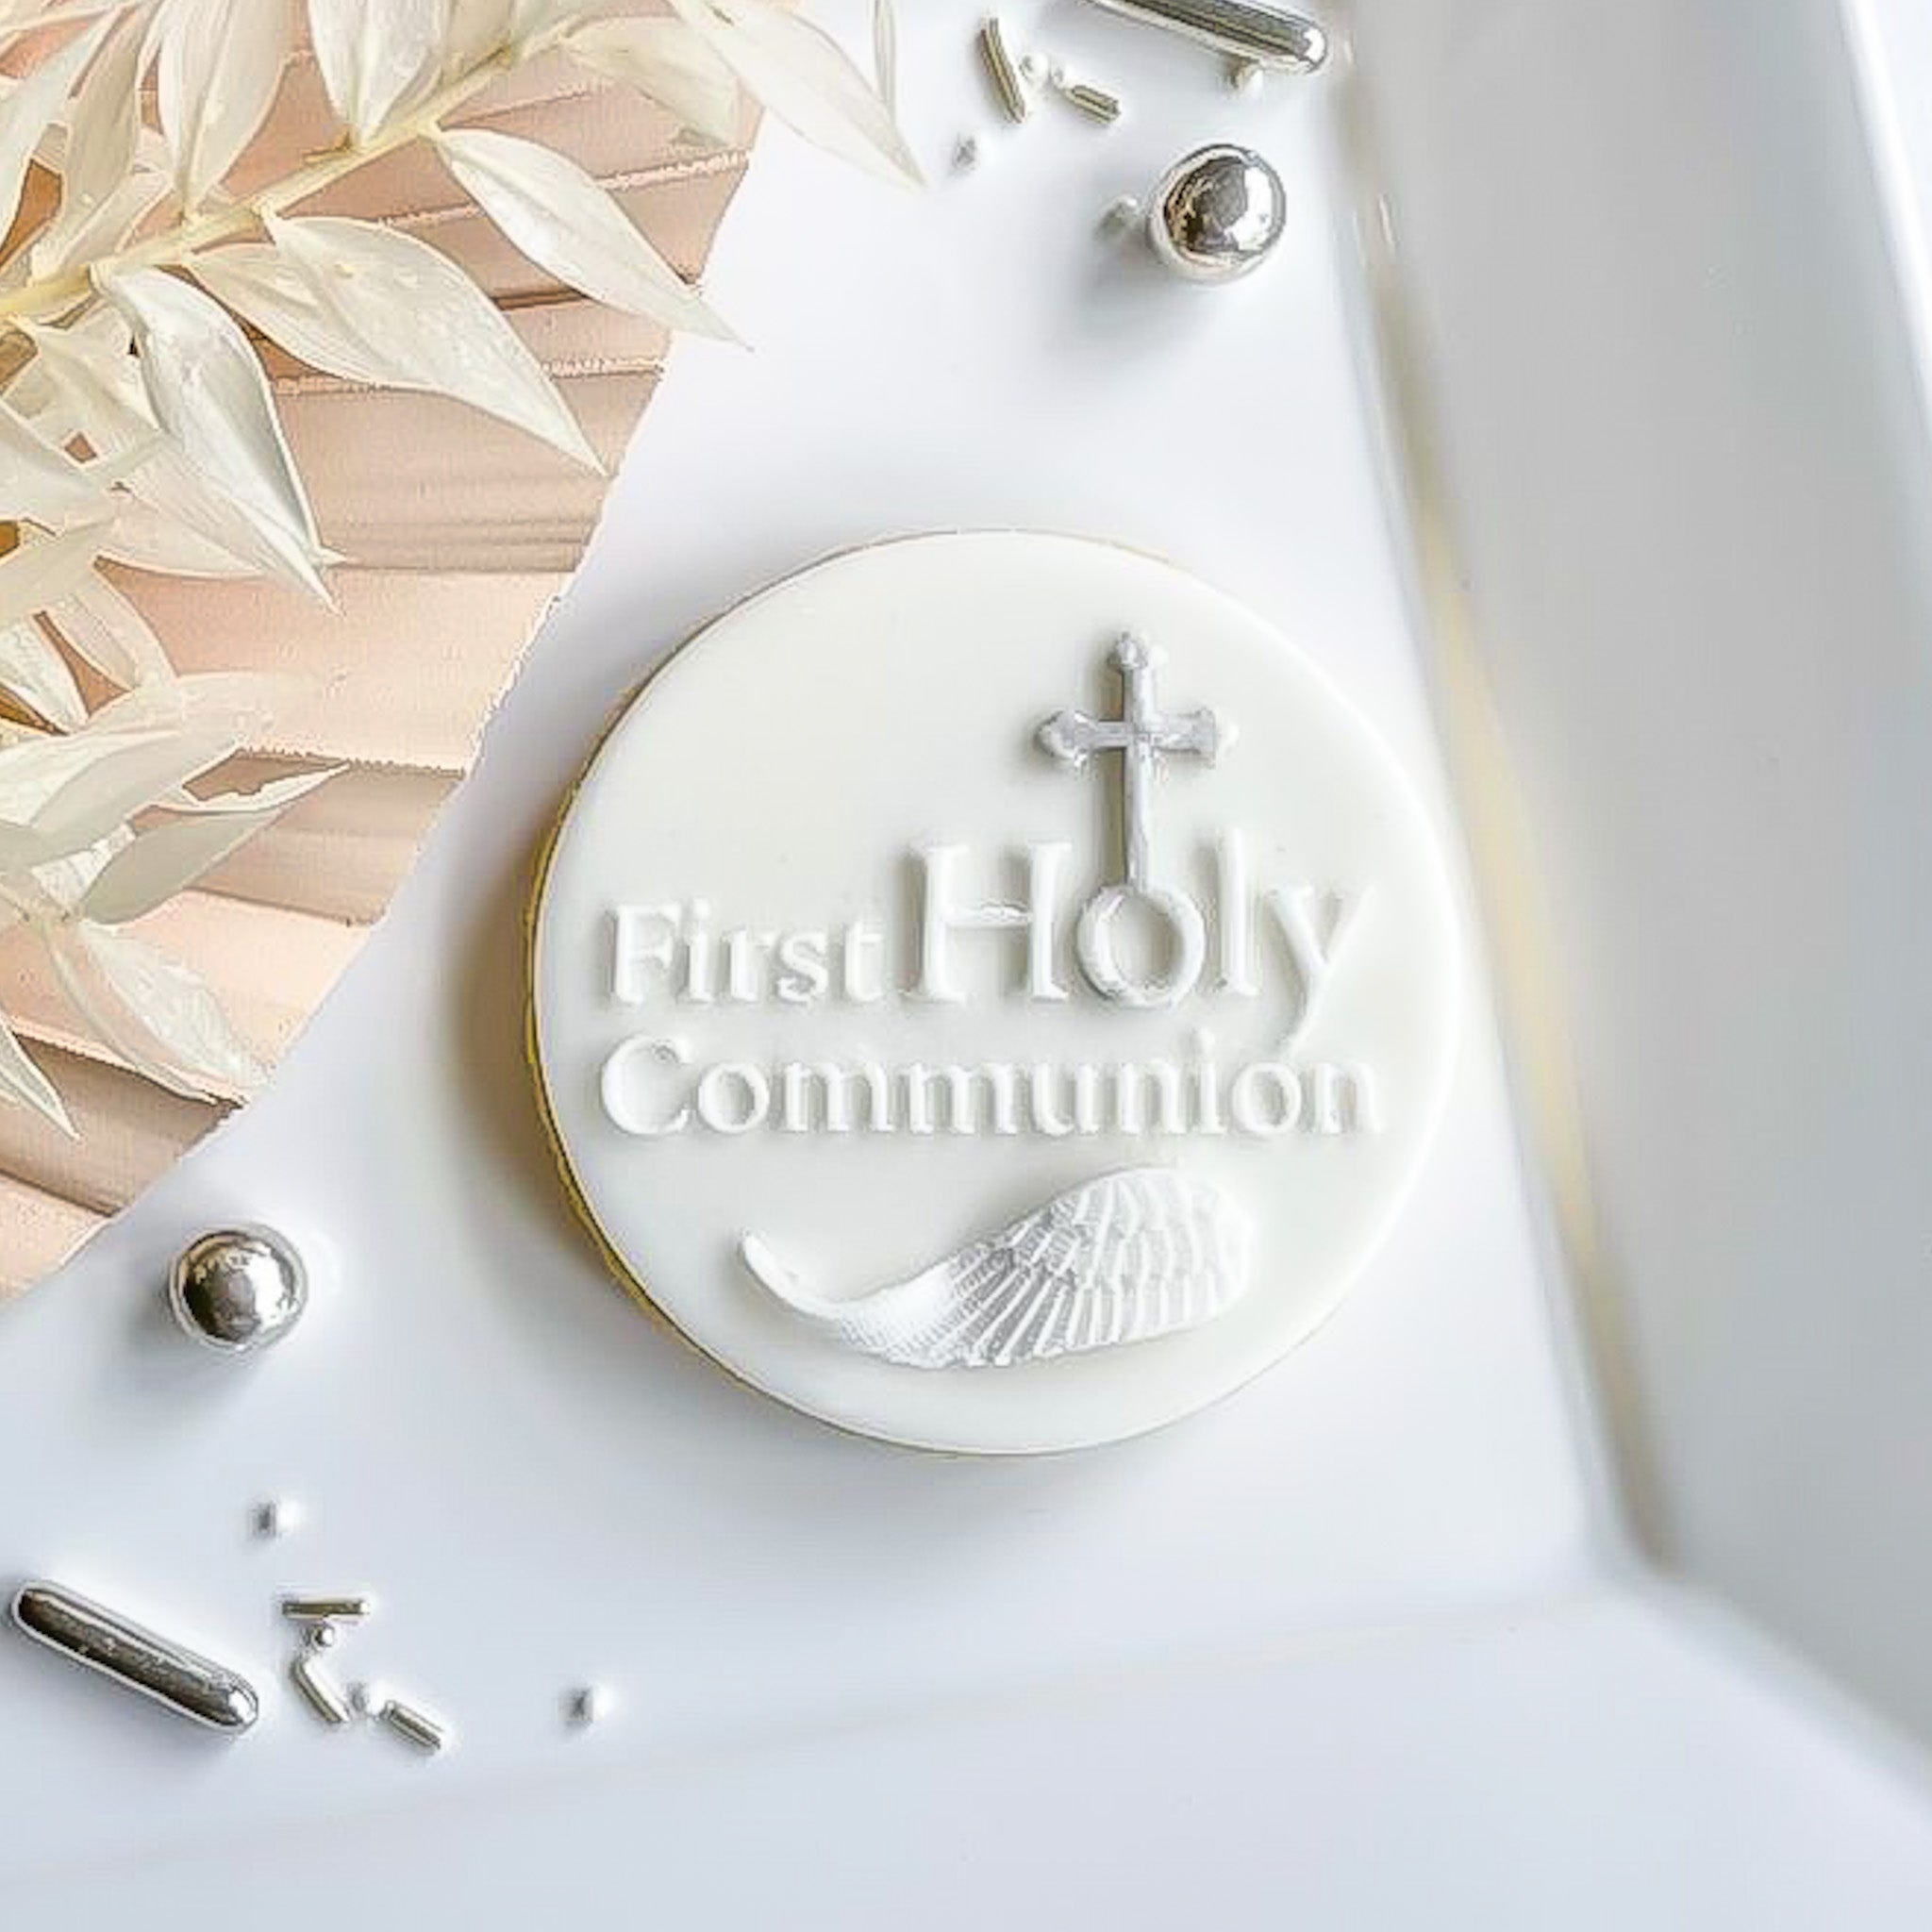 First Holy Communion - Reverse Stamp